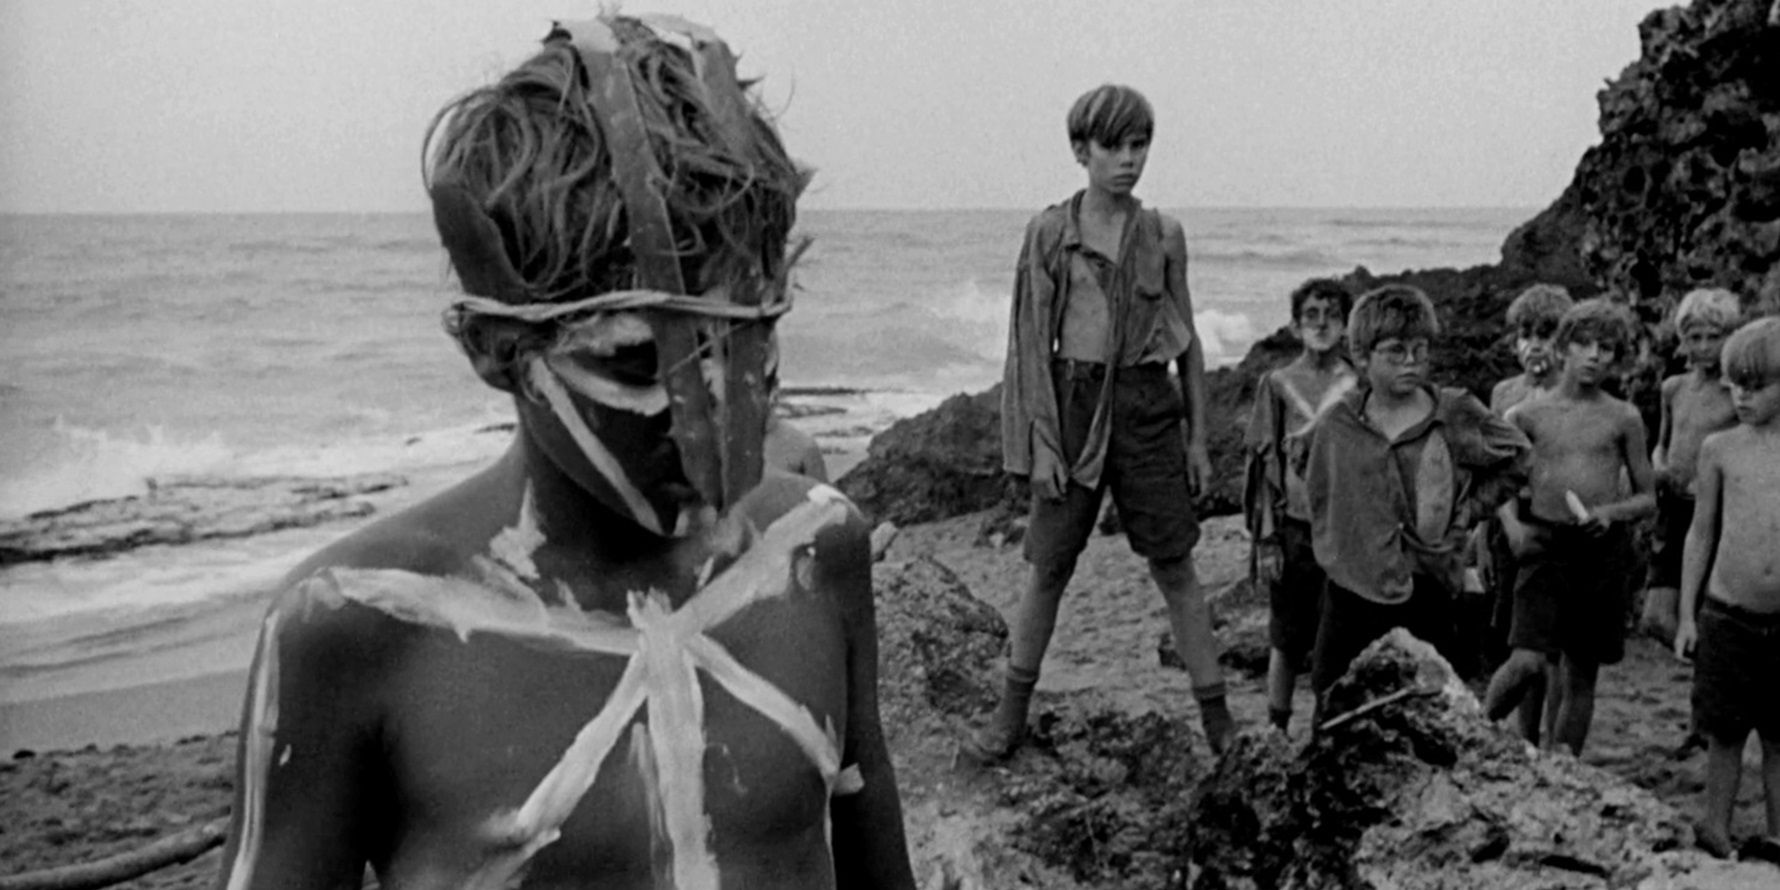 The kids on the beach in Lord of the Flies